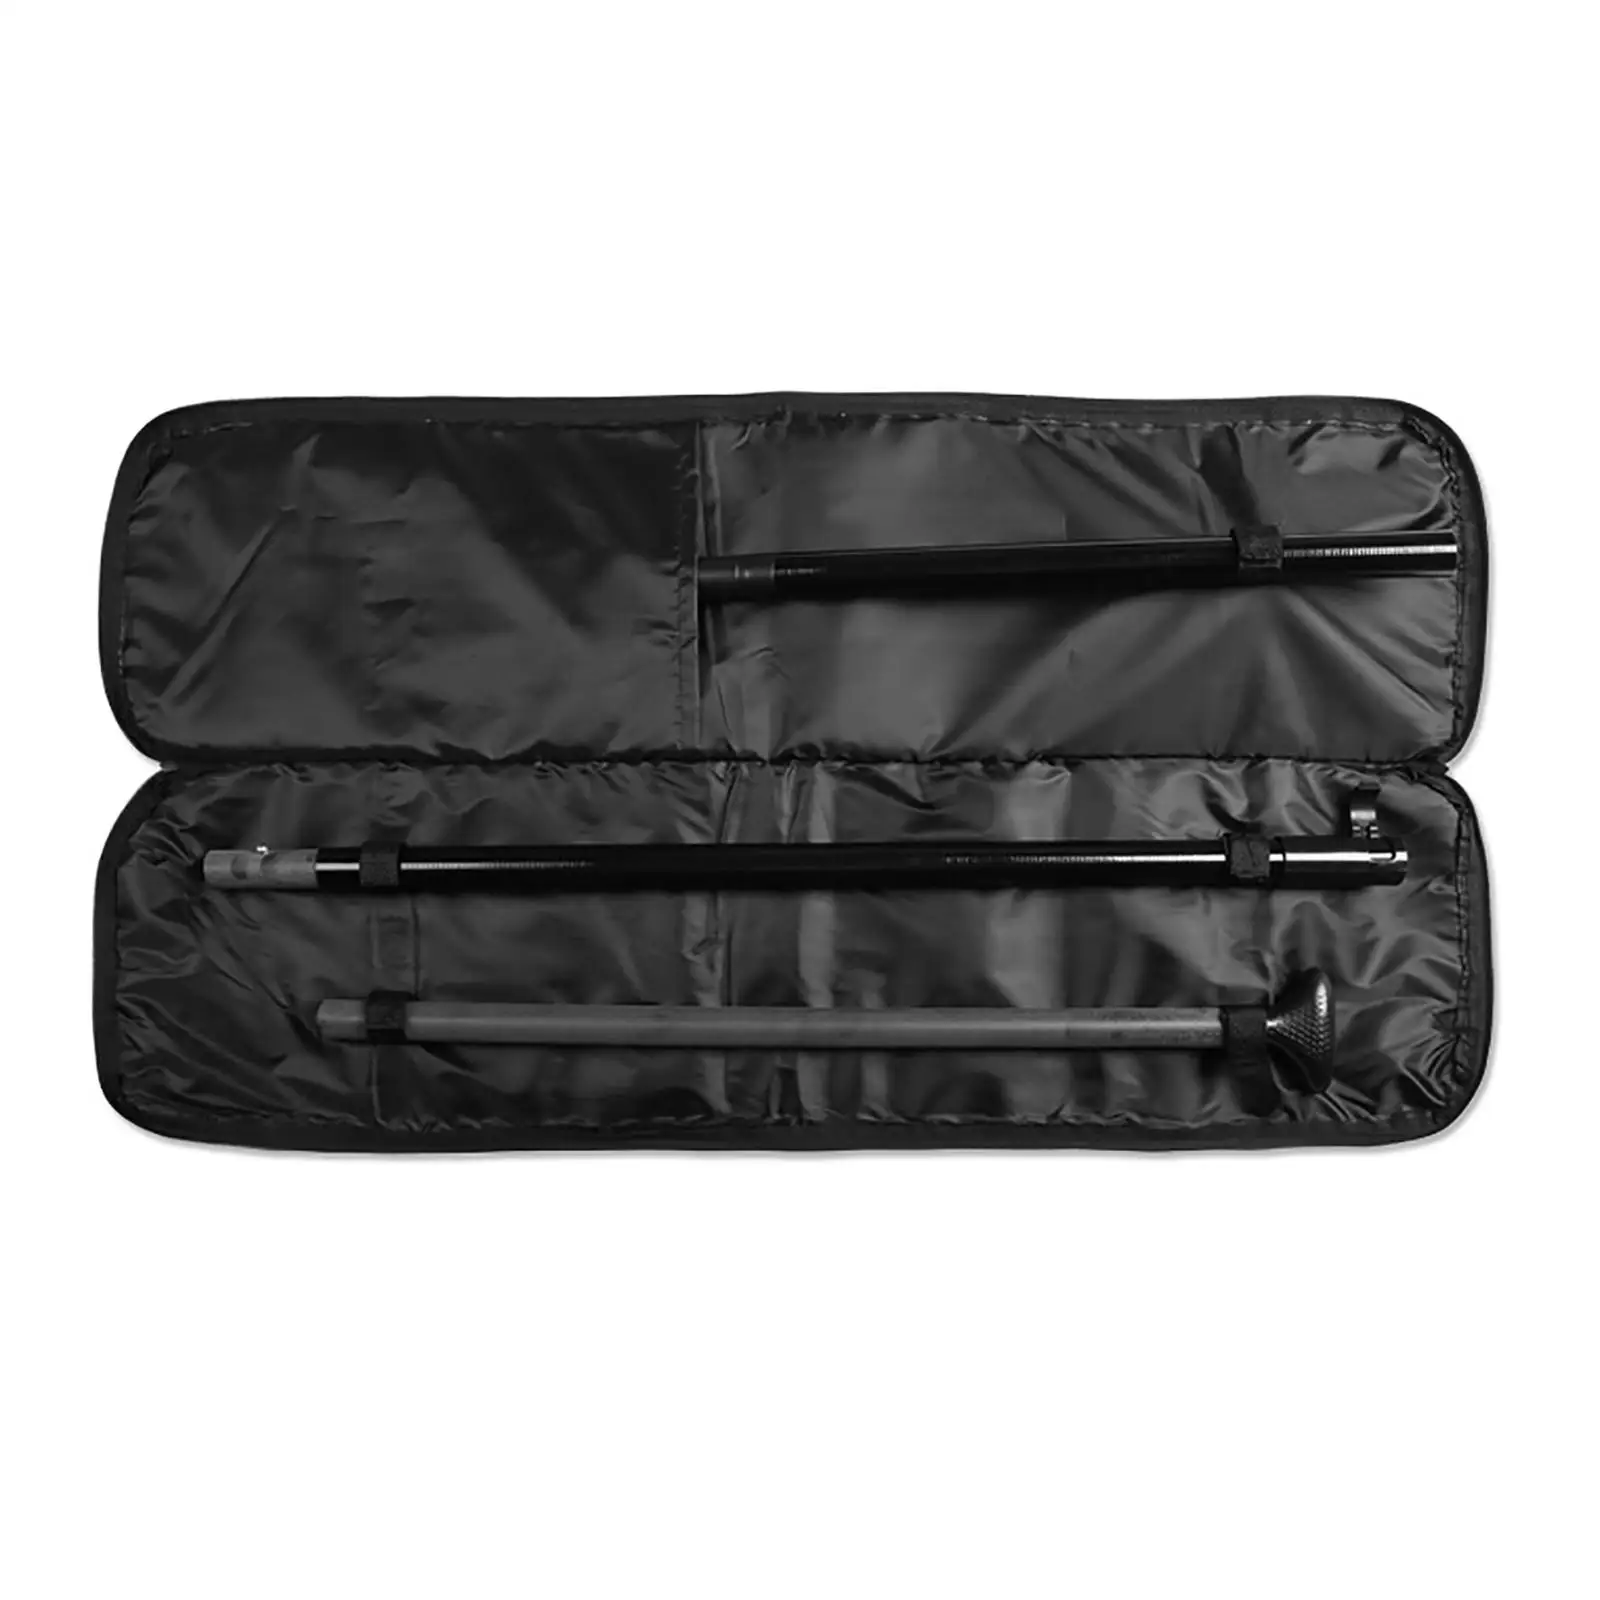 Portable Kayak Paddle Bag Storage Holder Paddle Blade Case with Handles Carrying Pouch Cover Tote for Surfing Sups Boating Canoe